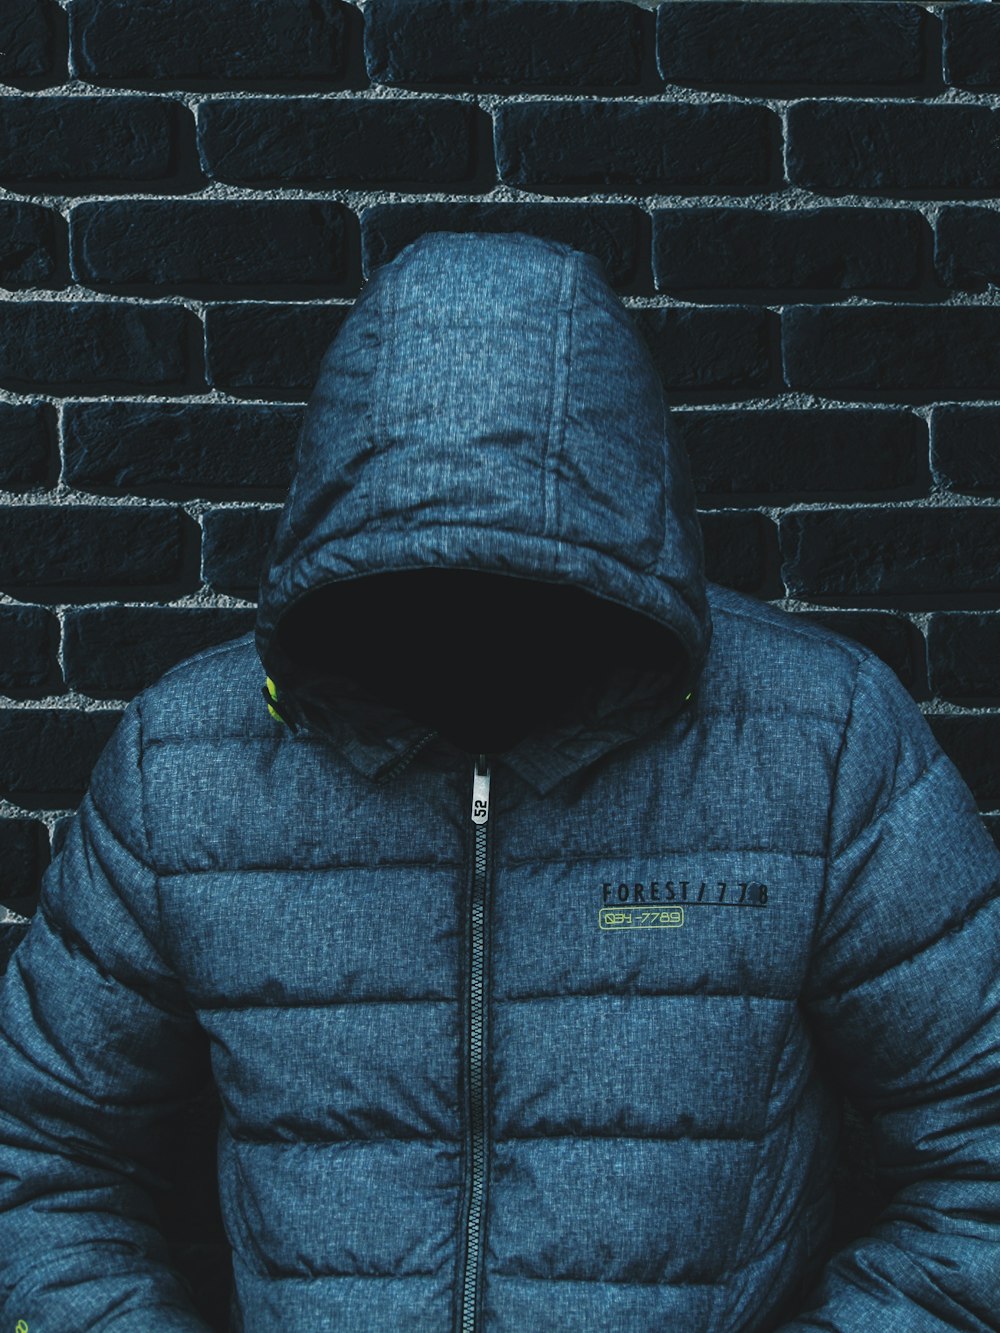 person with head down wearing blue zip-up jacket leaning on wall